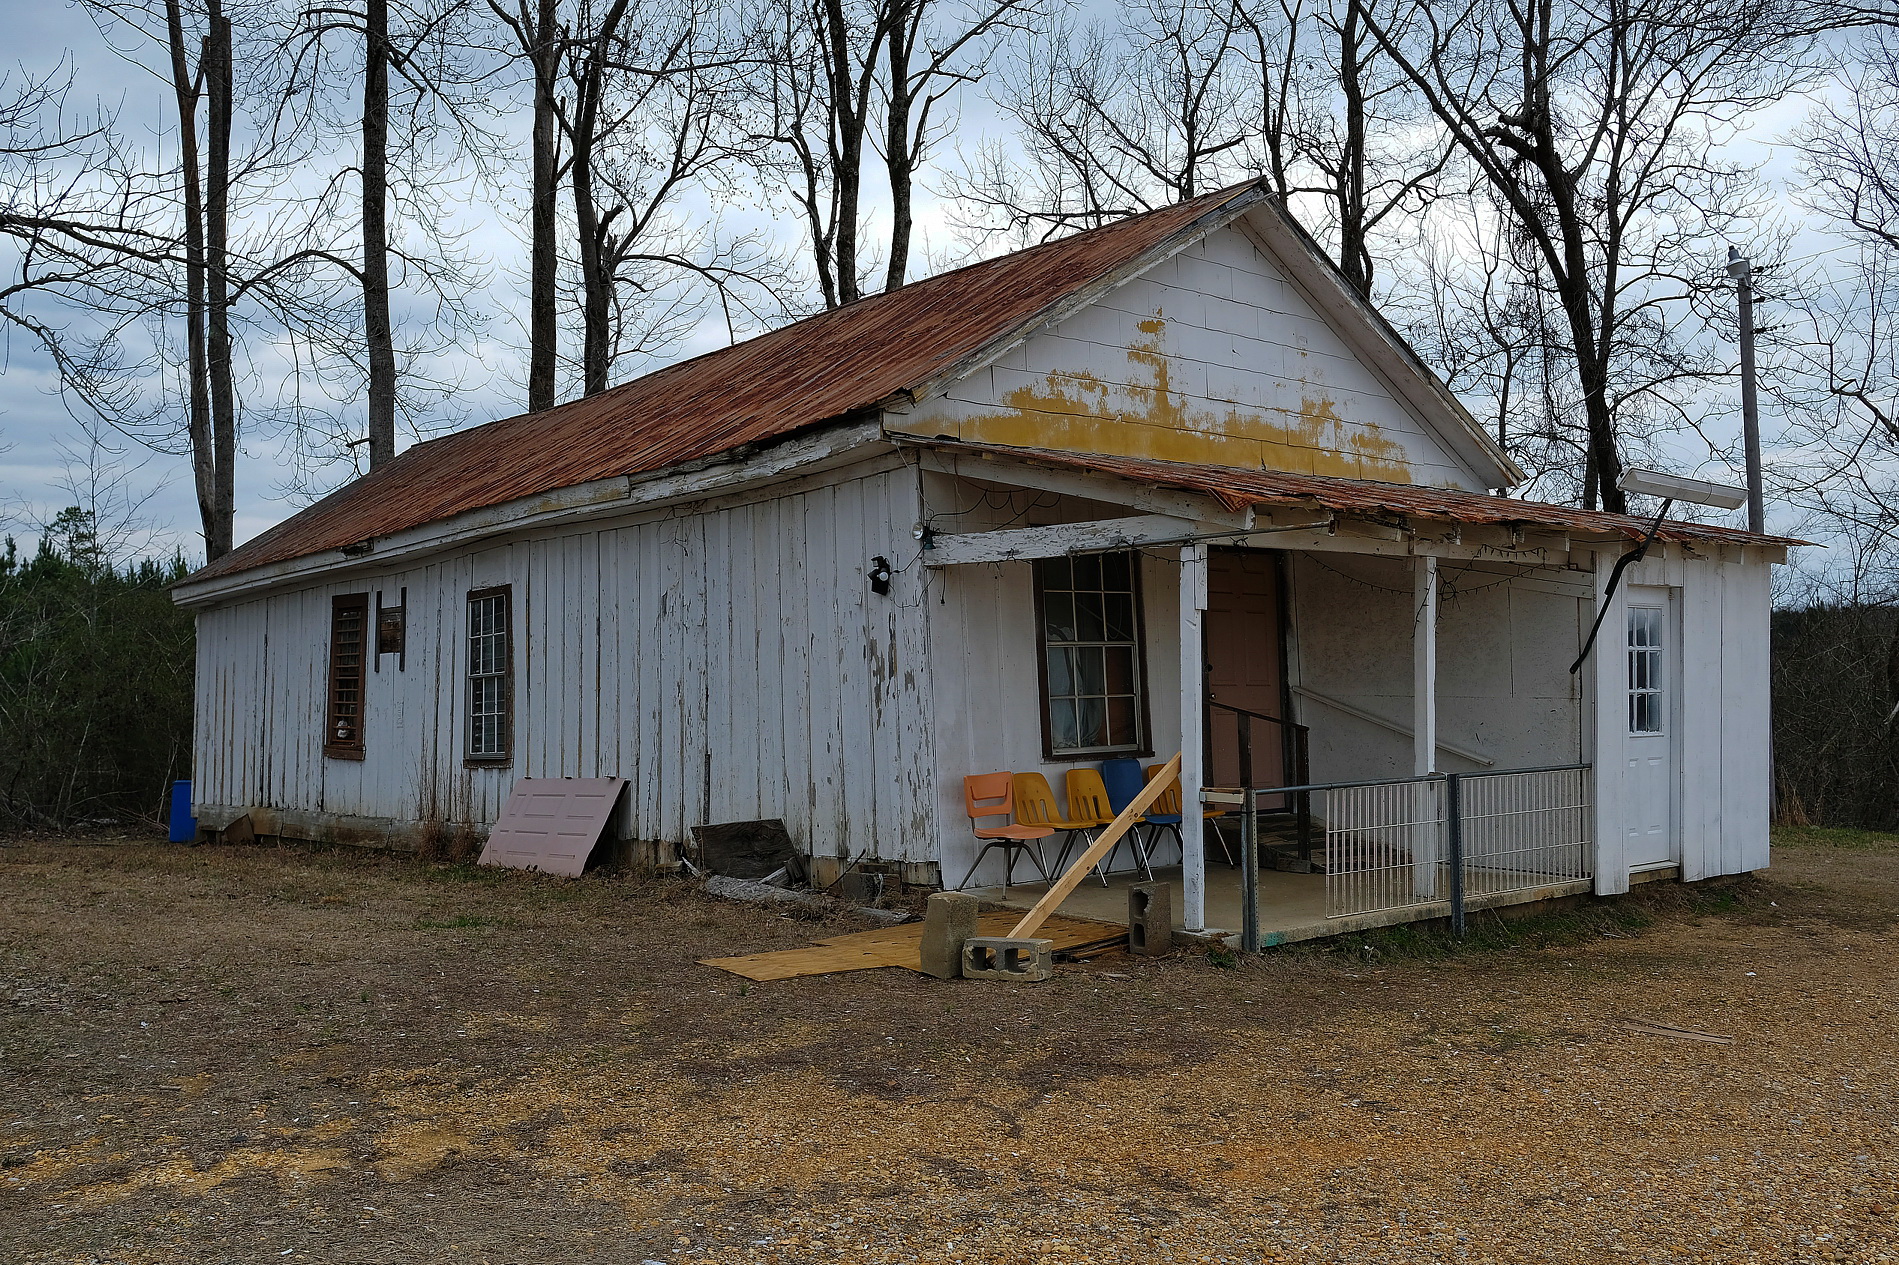  Abandoned house at the intersection of Highways 370 and 30 in Union County 